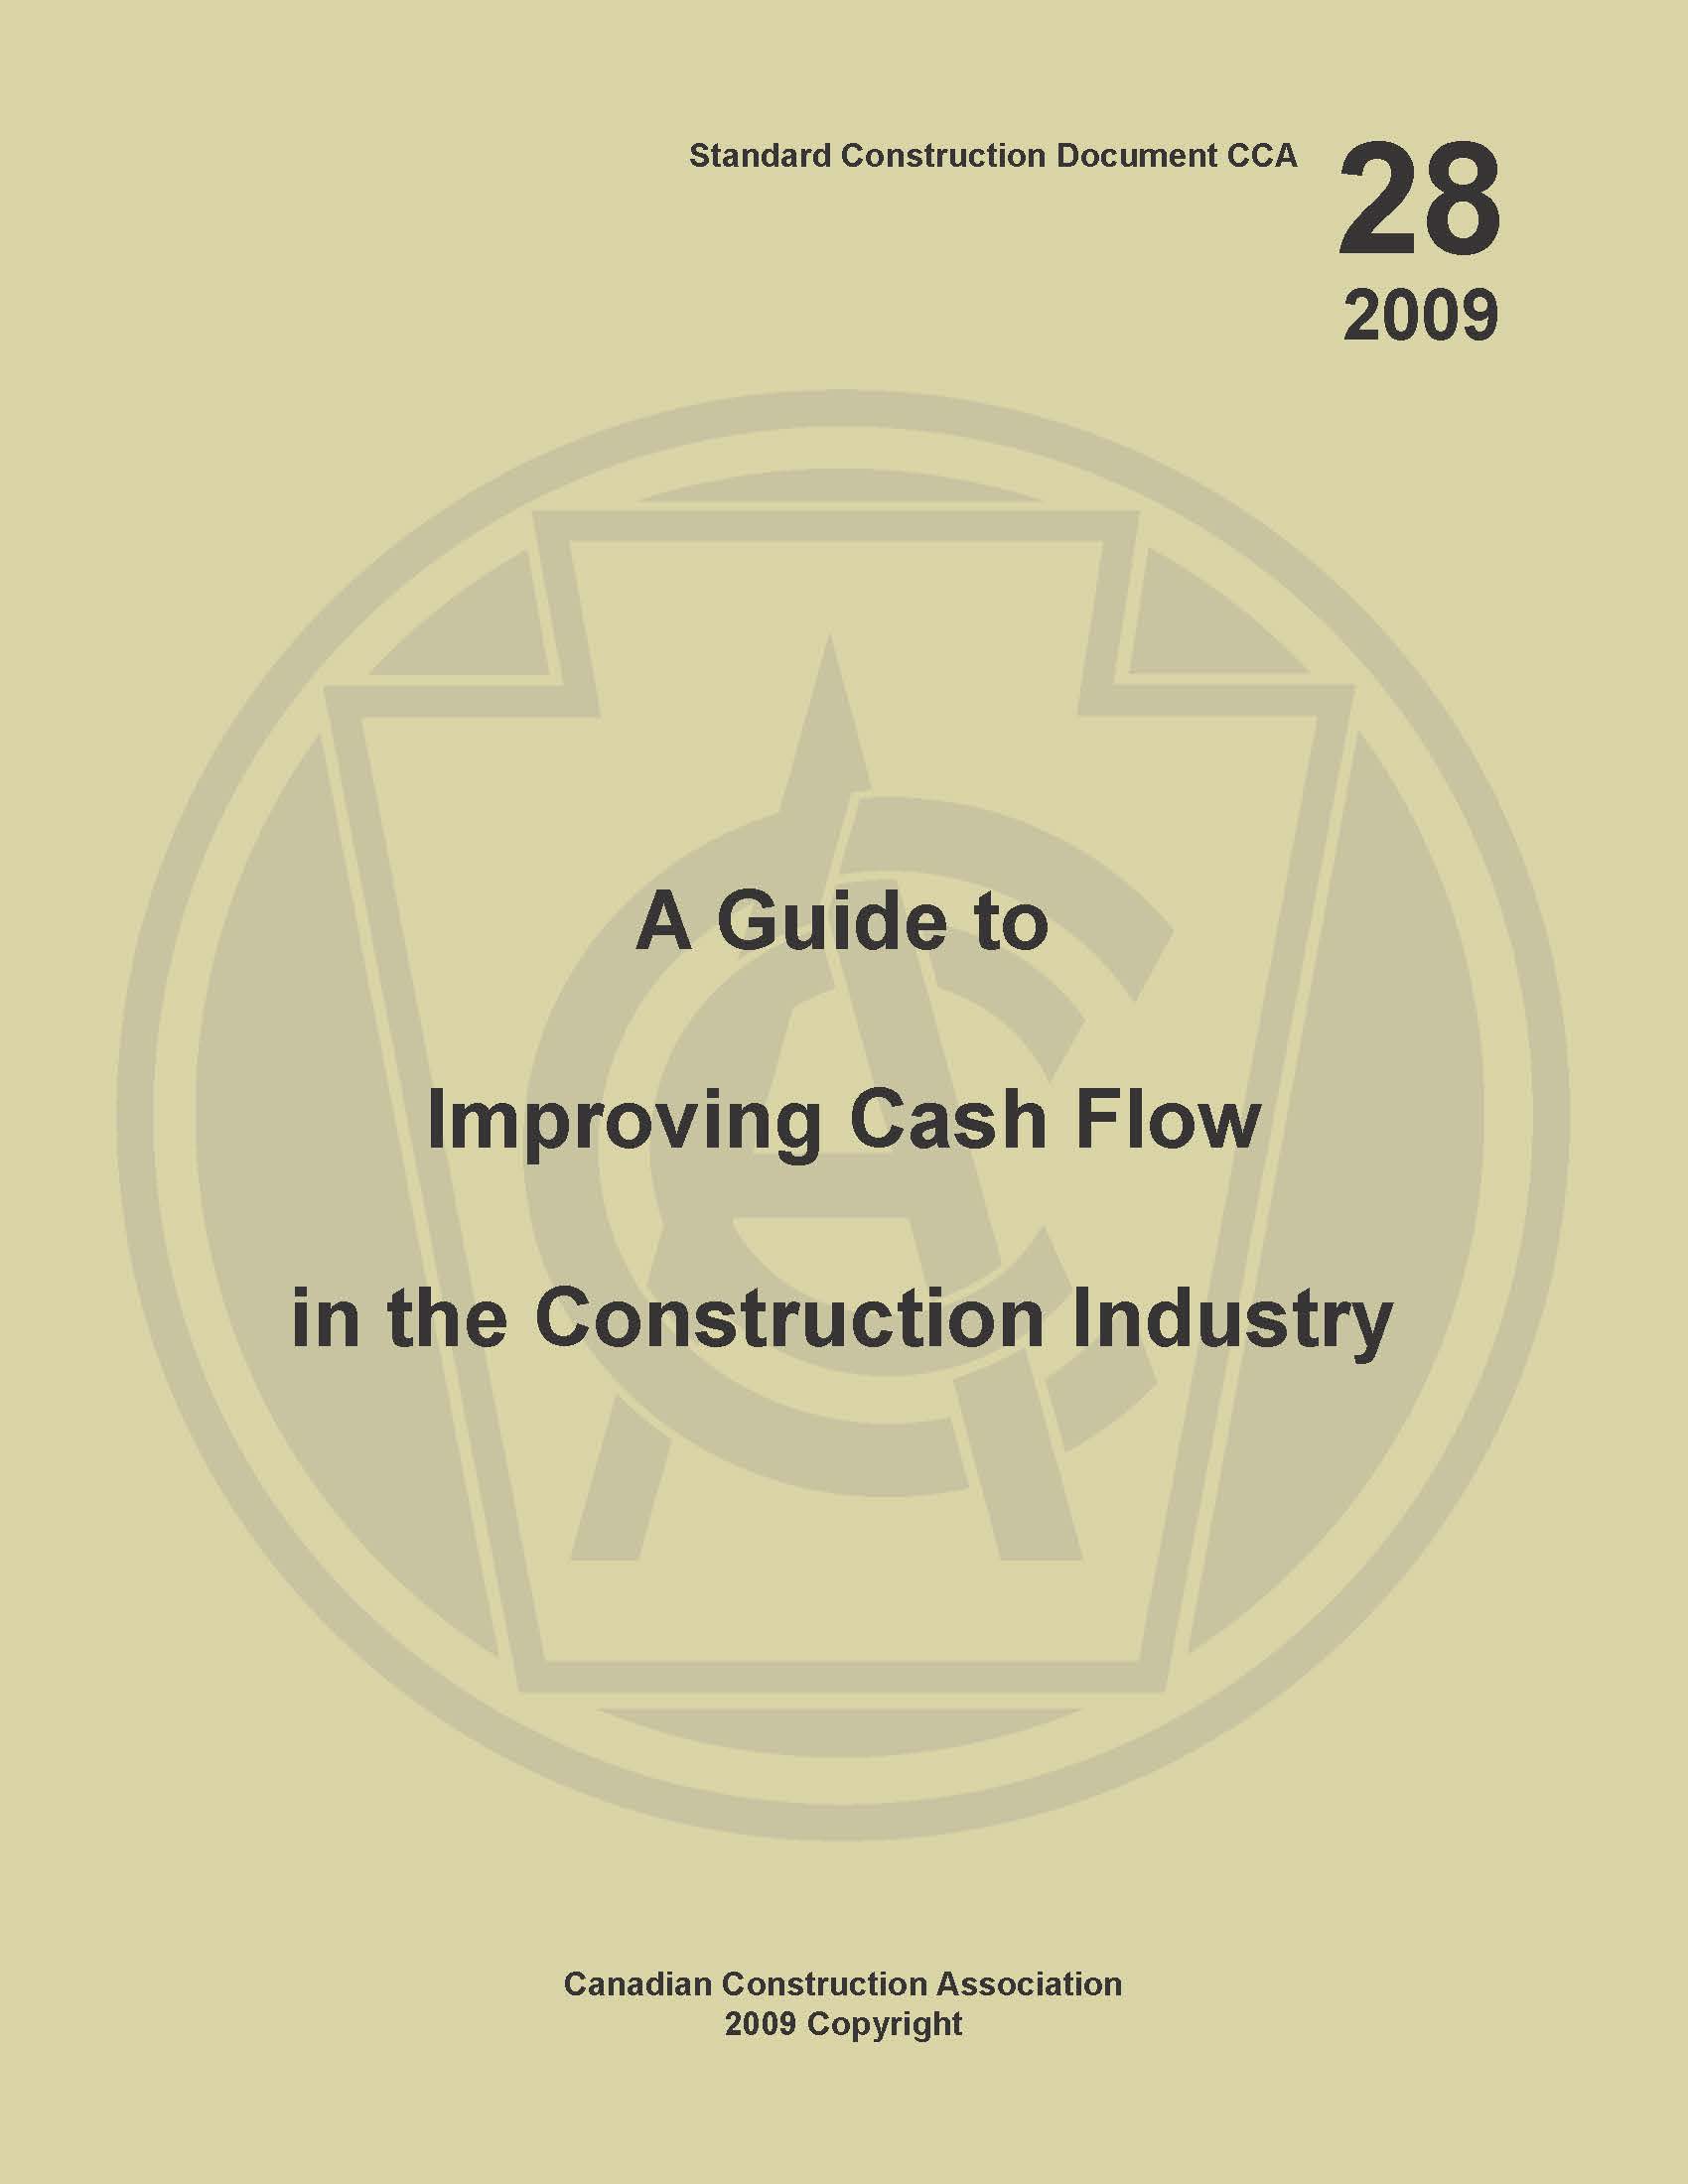 CCA 28 [Electronic Version]  Guide to improving cash flow in the construction industry